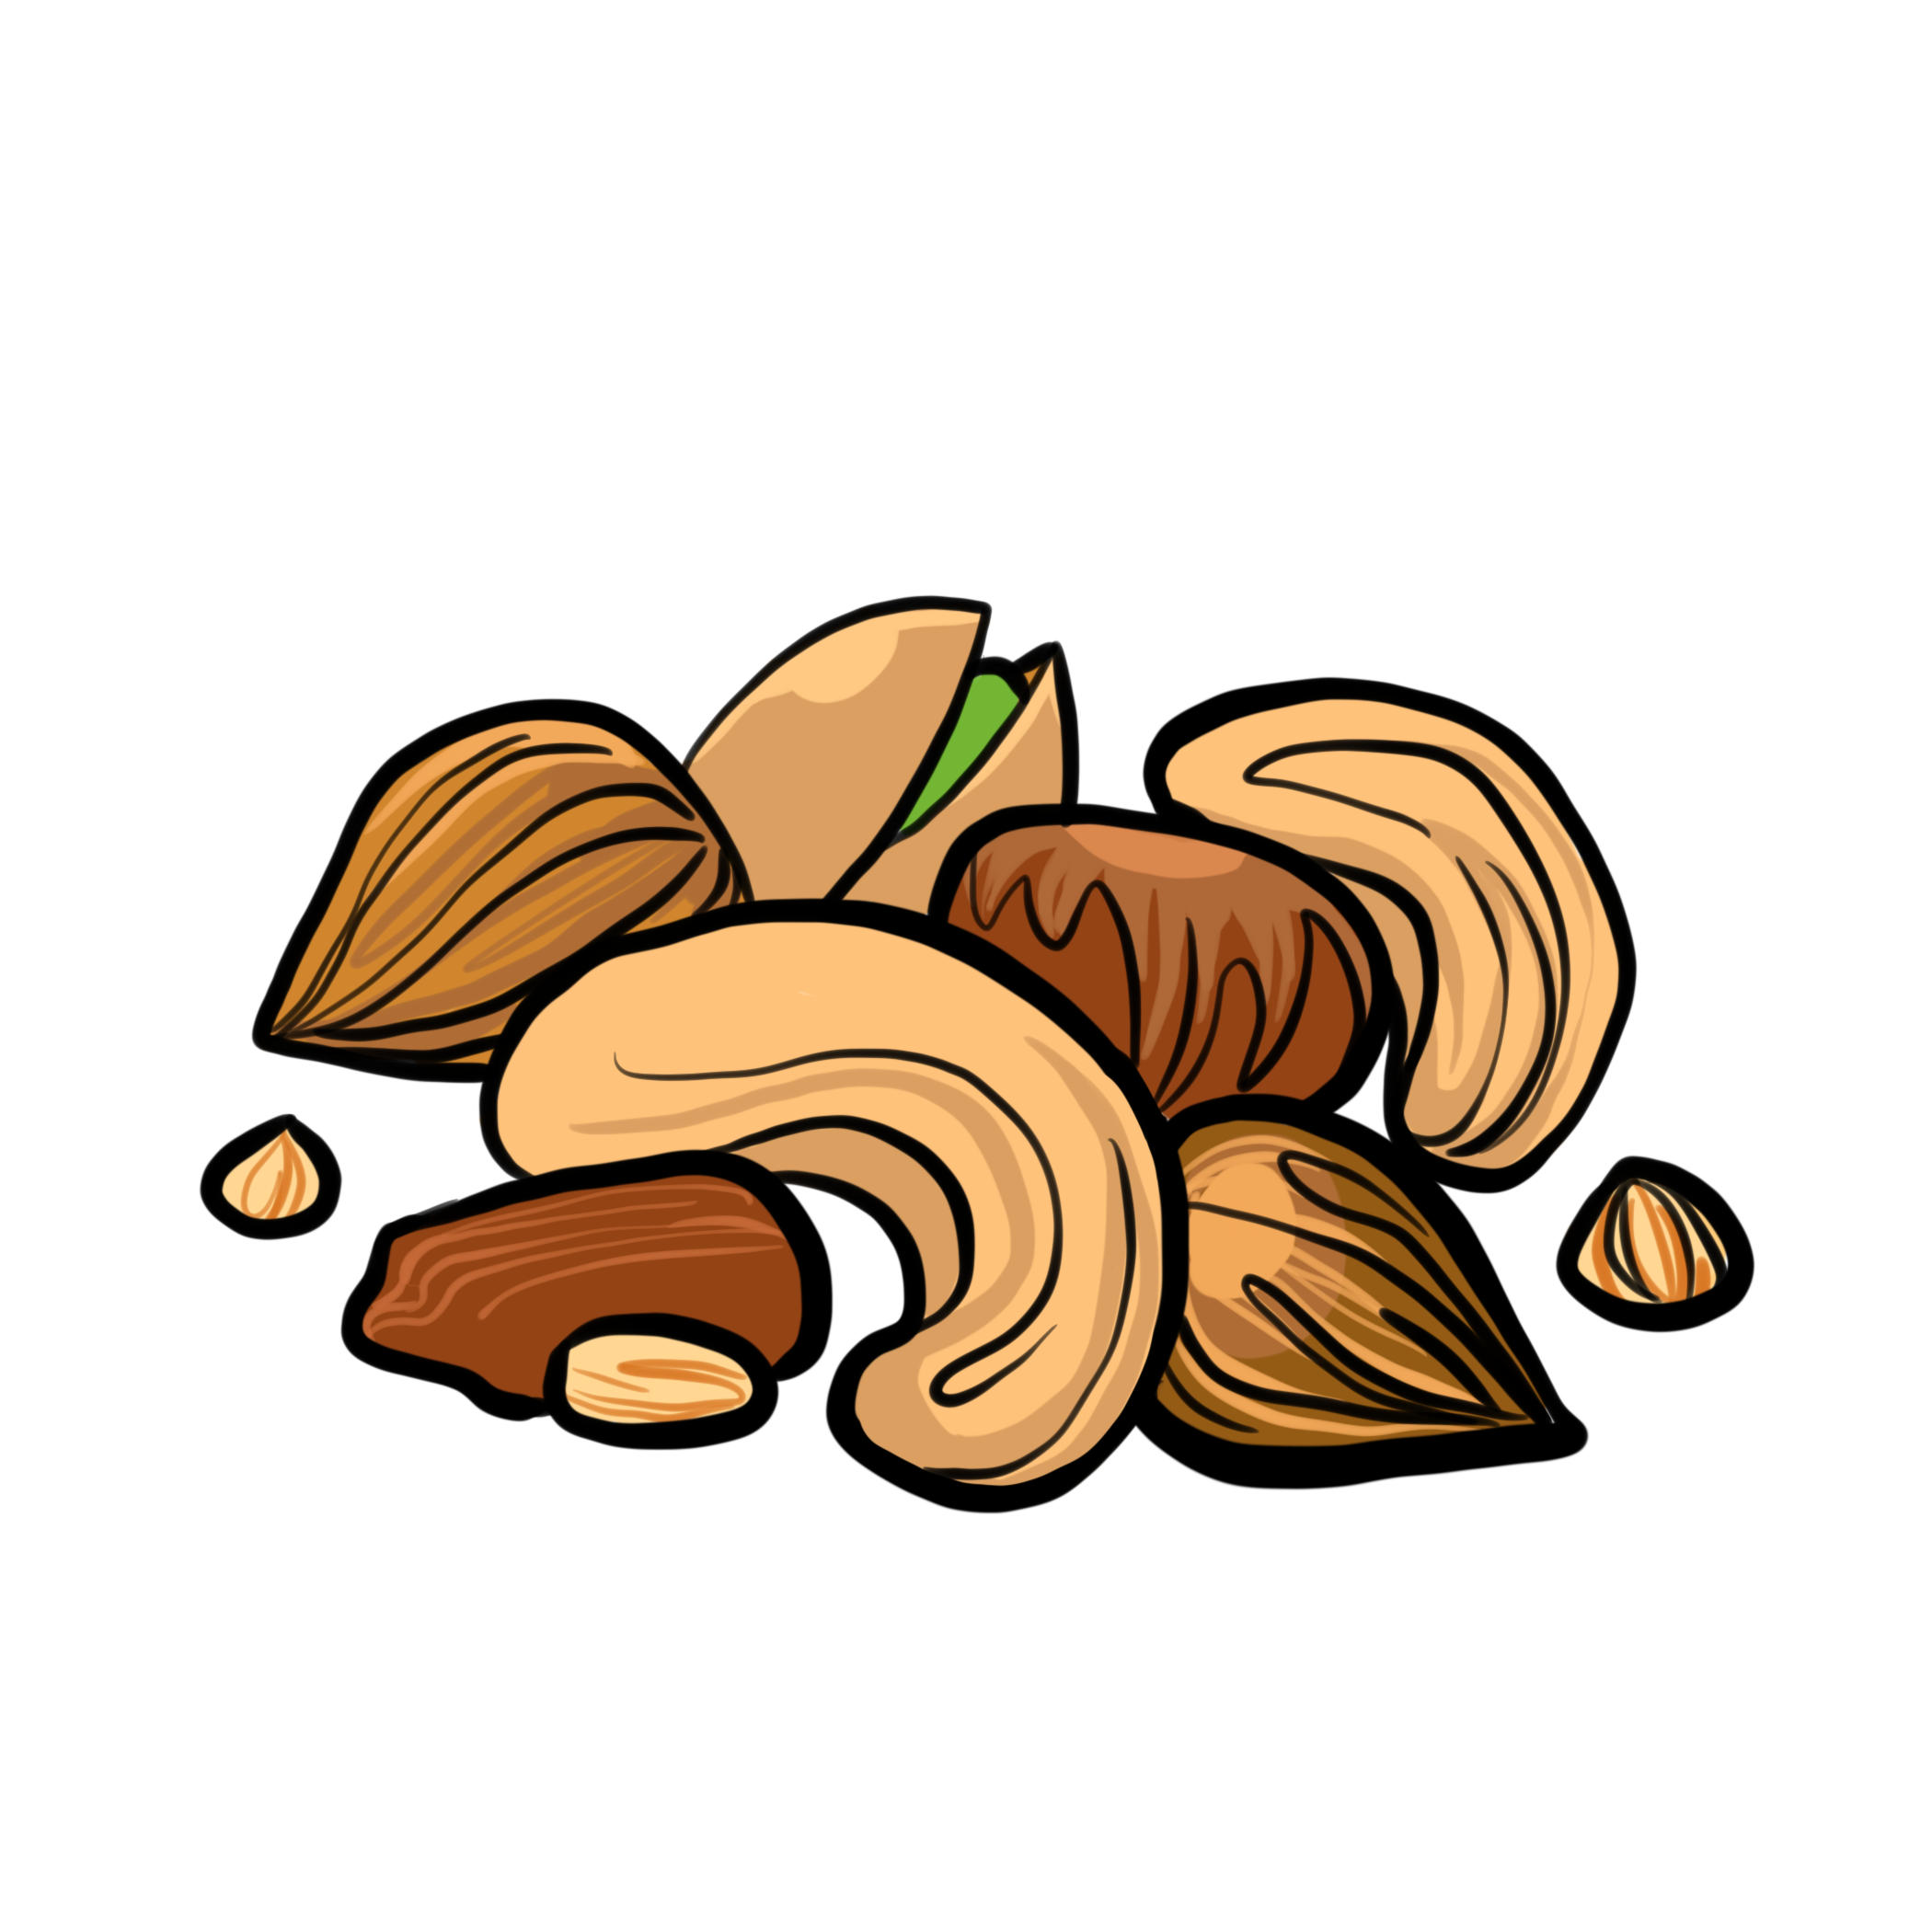 Pngtreevariety of nuts decorative illustration 4676369